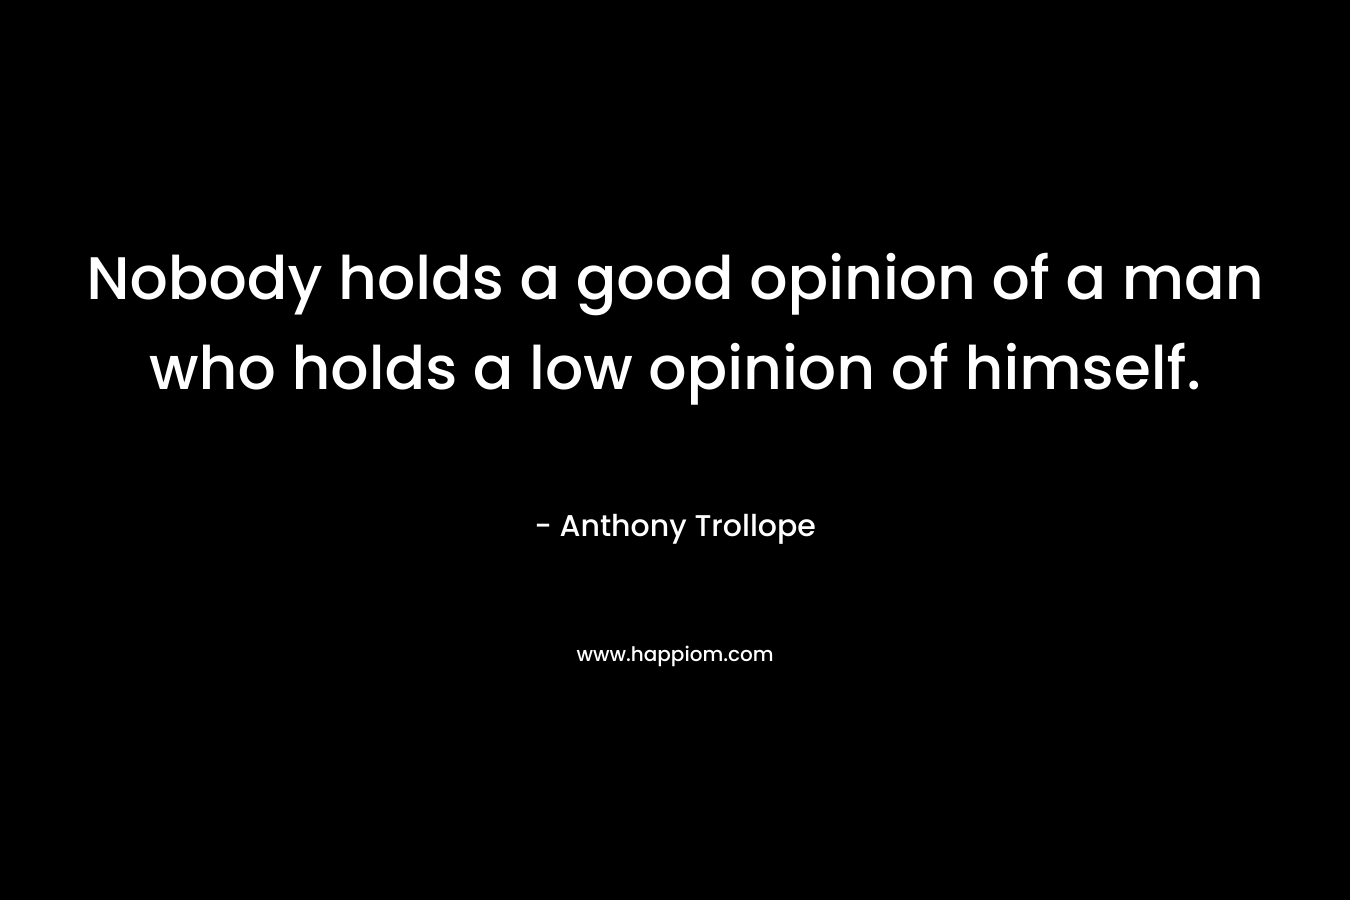 Nobody holds a good opinion of a man who holds a low opinion of himself. – Anthony Trollope